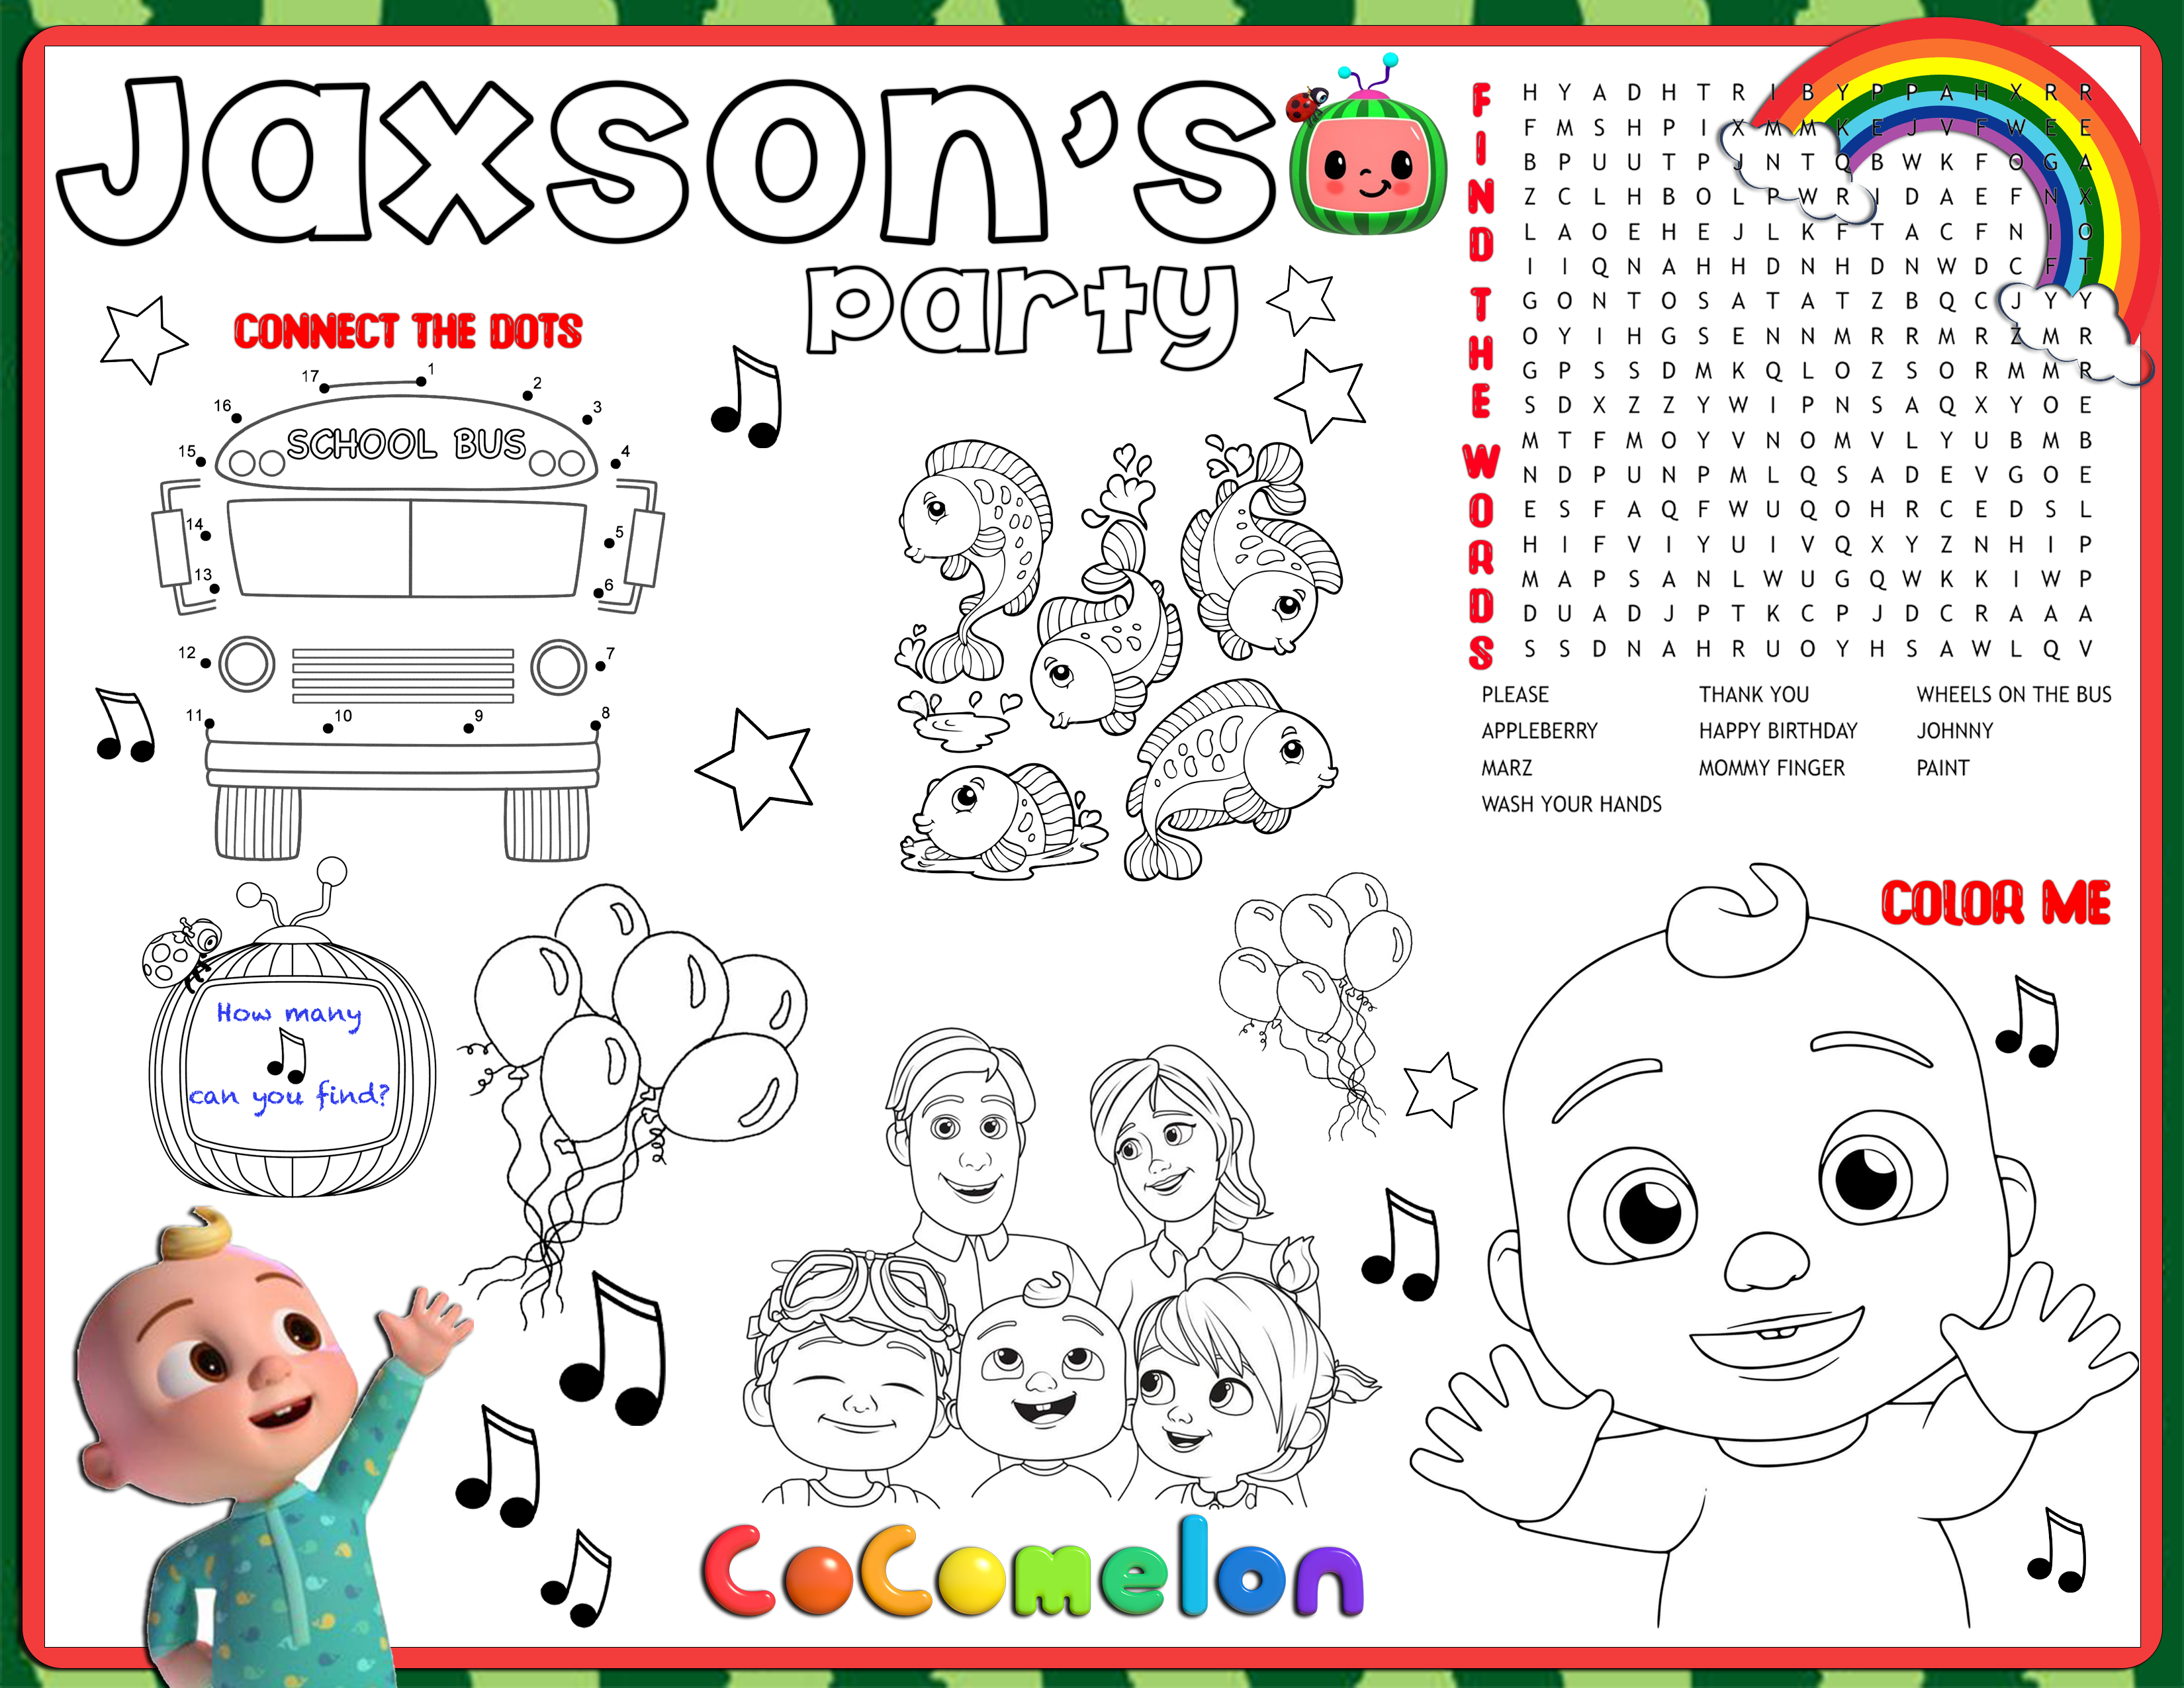 8 Cocomelon coloring paper placemats, Cocomelon birthday party, first  birthday party supplies, Cocomelon party favors, Cocomelon coloring